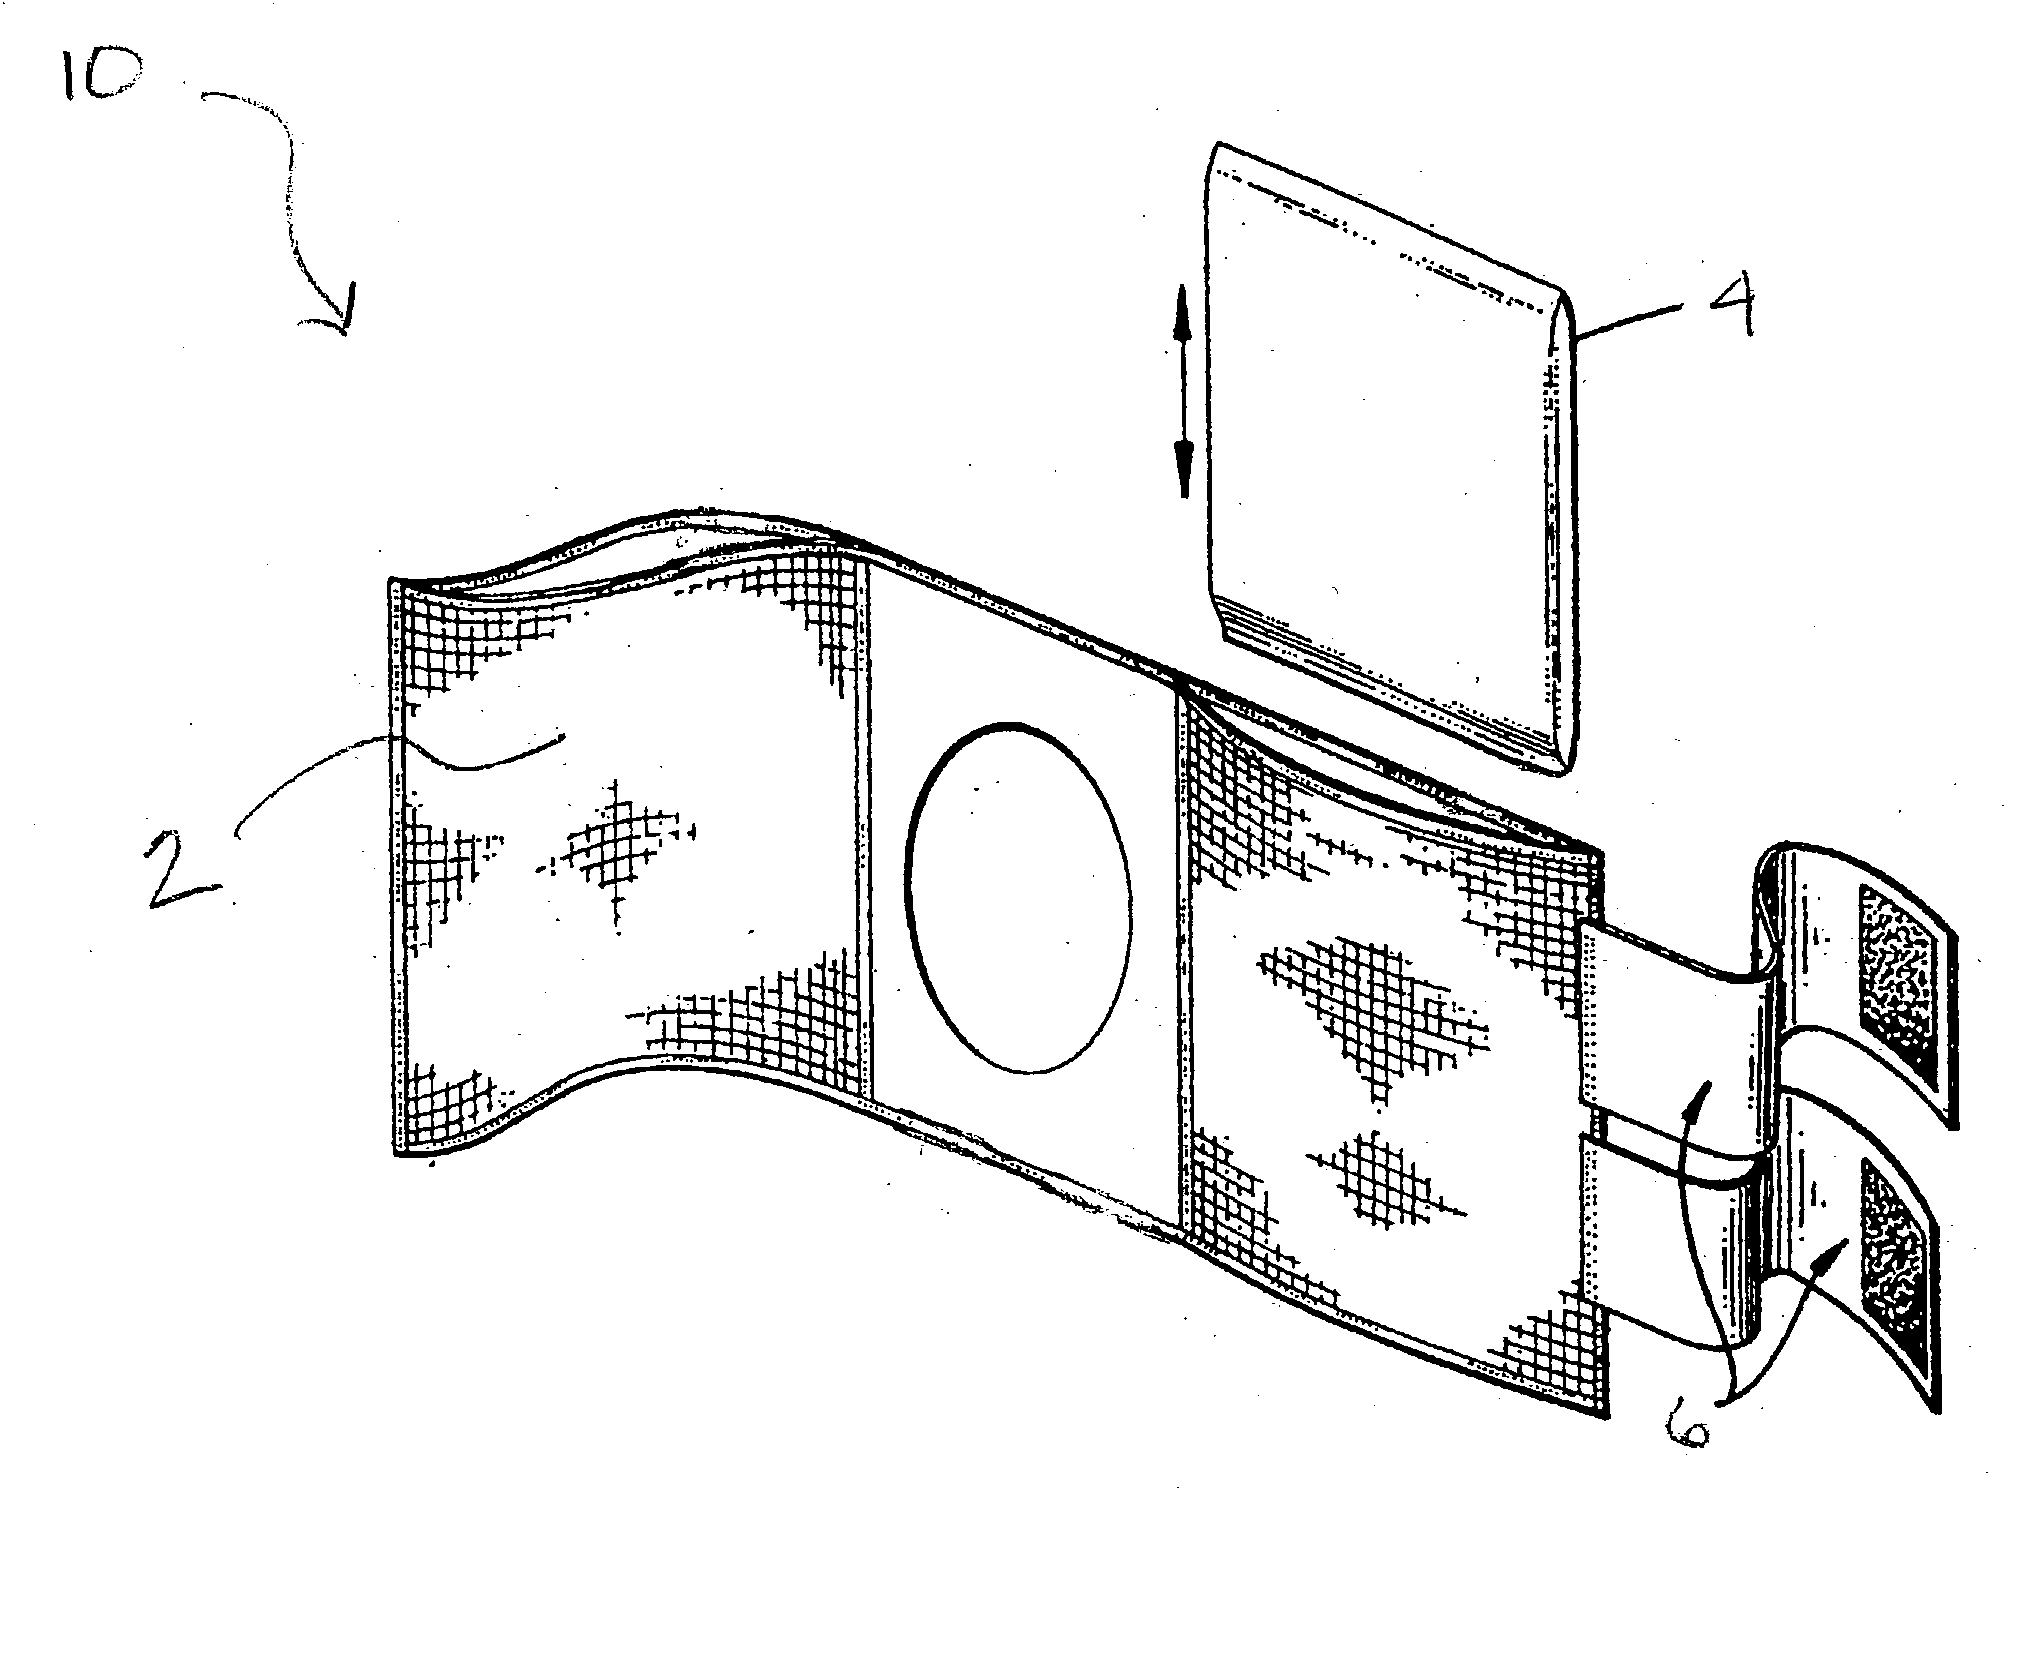 Portable cooling or heating device for applying cryotherapy